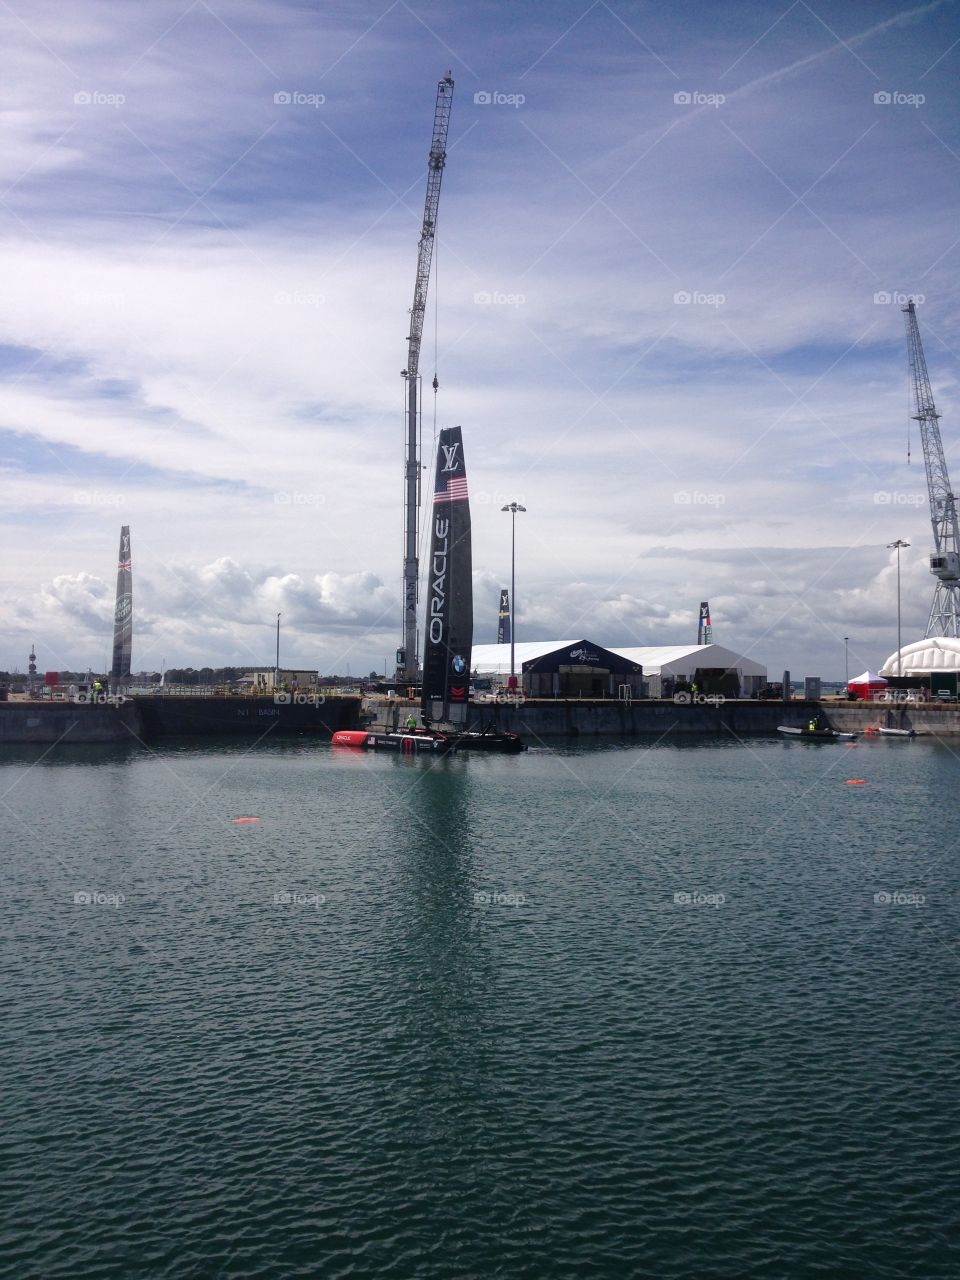 USA Oracle, America's Cup. U.S. Oracle, being lowered into harbour, America's Cup, Portsmouth, Solent, England, 23-07-15